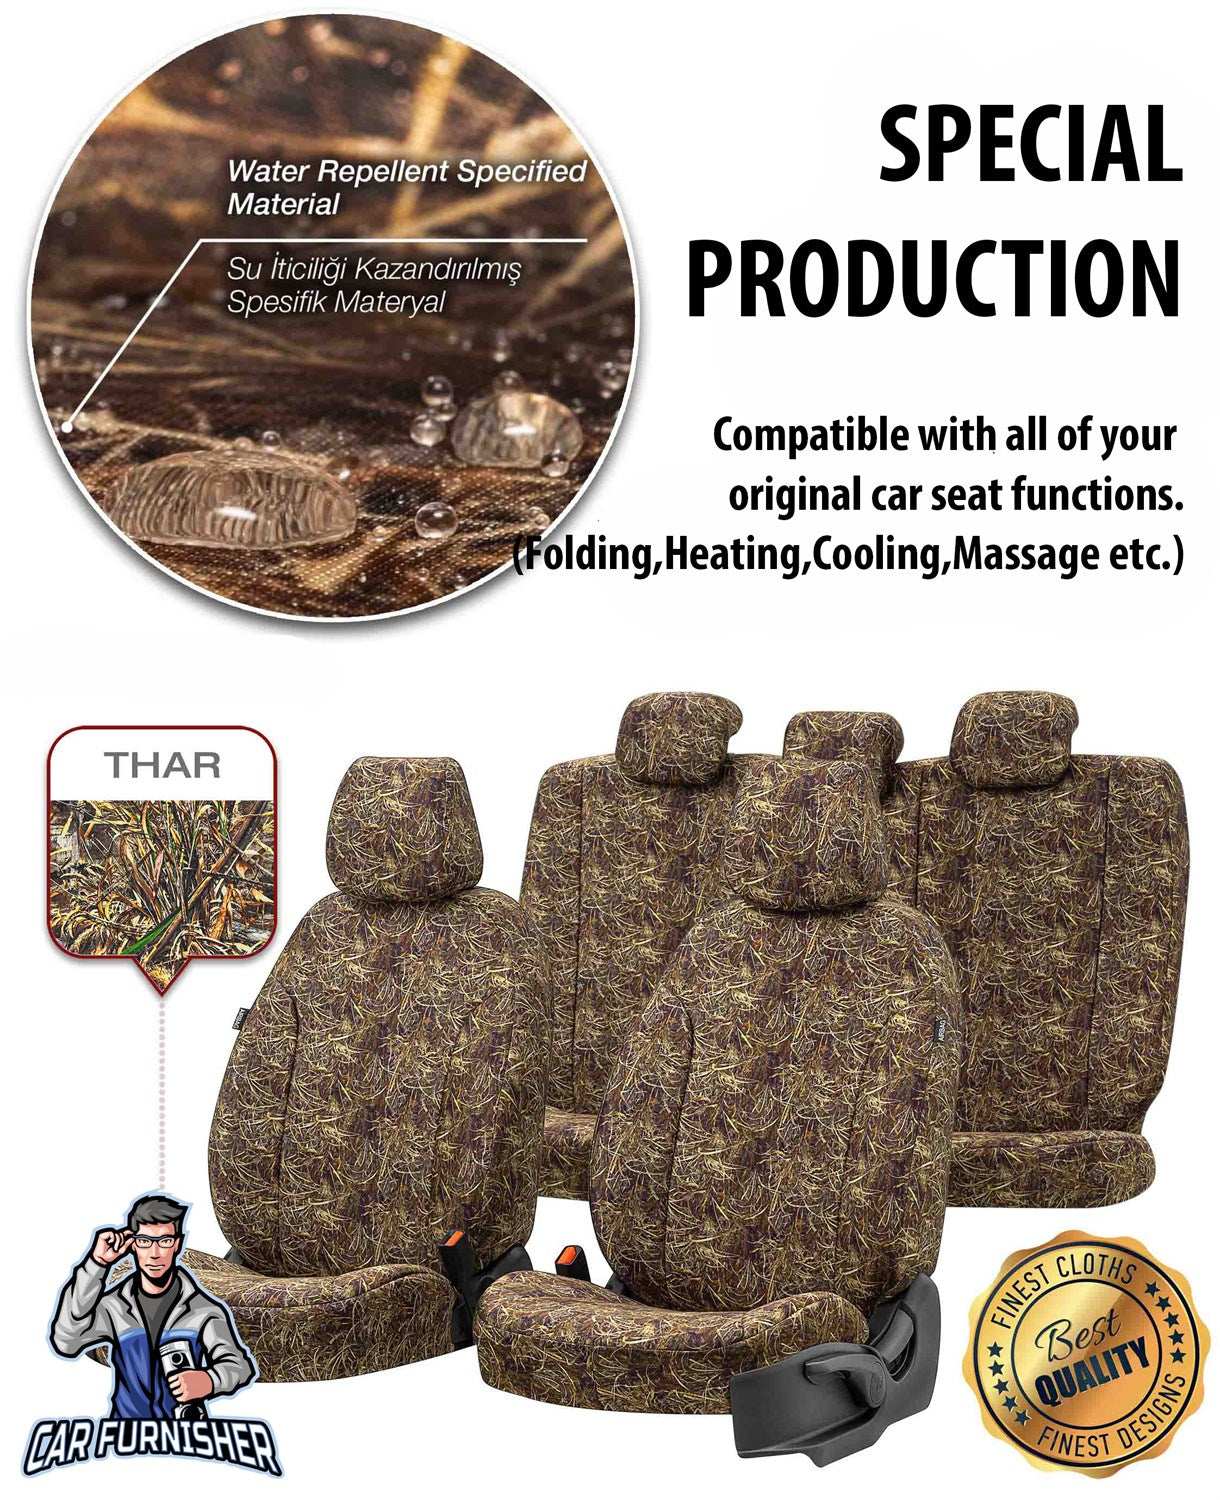 Ford Transit Seat Covers Camouflage Waterproof Design Everest Camo Waterproof Fabric